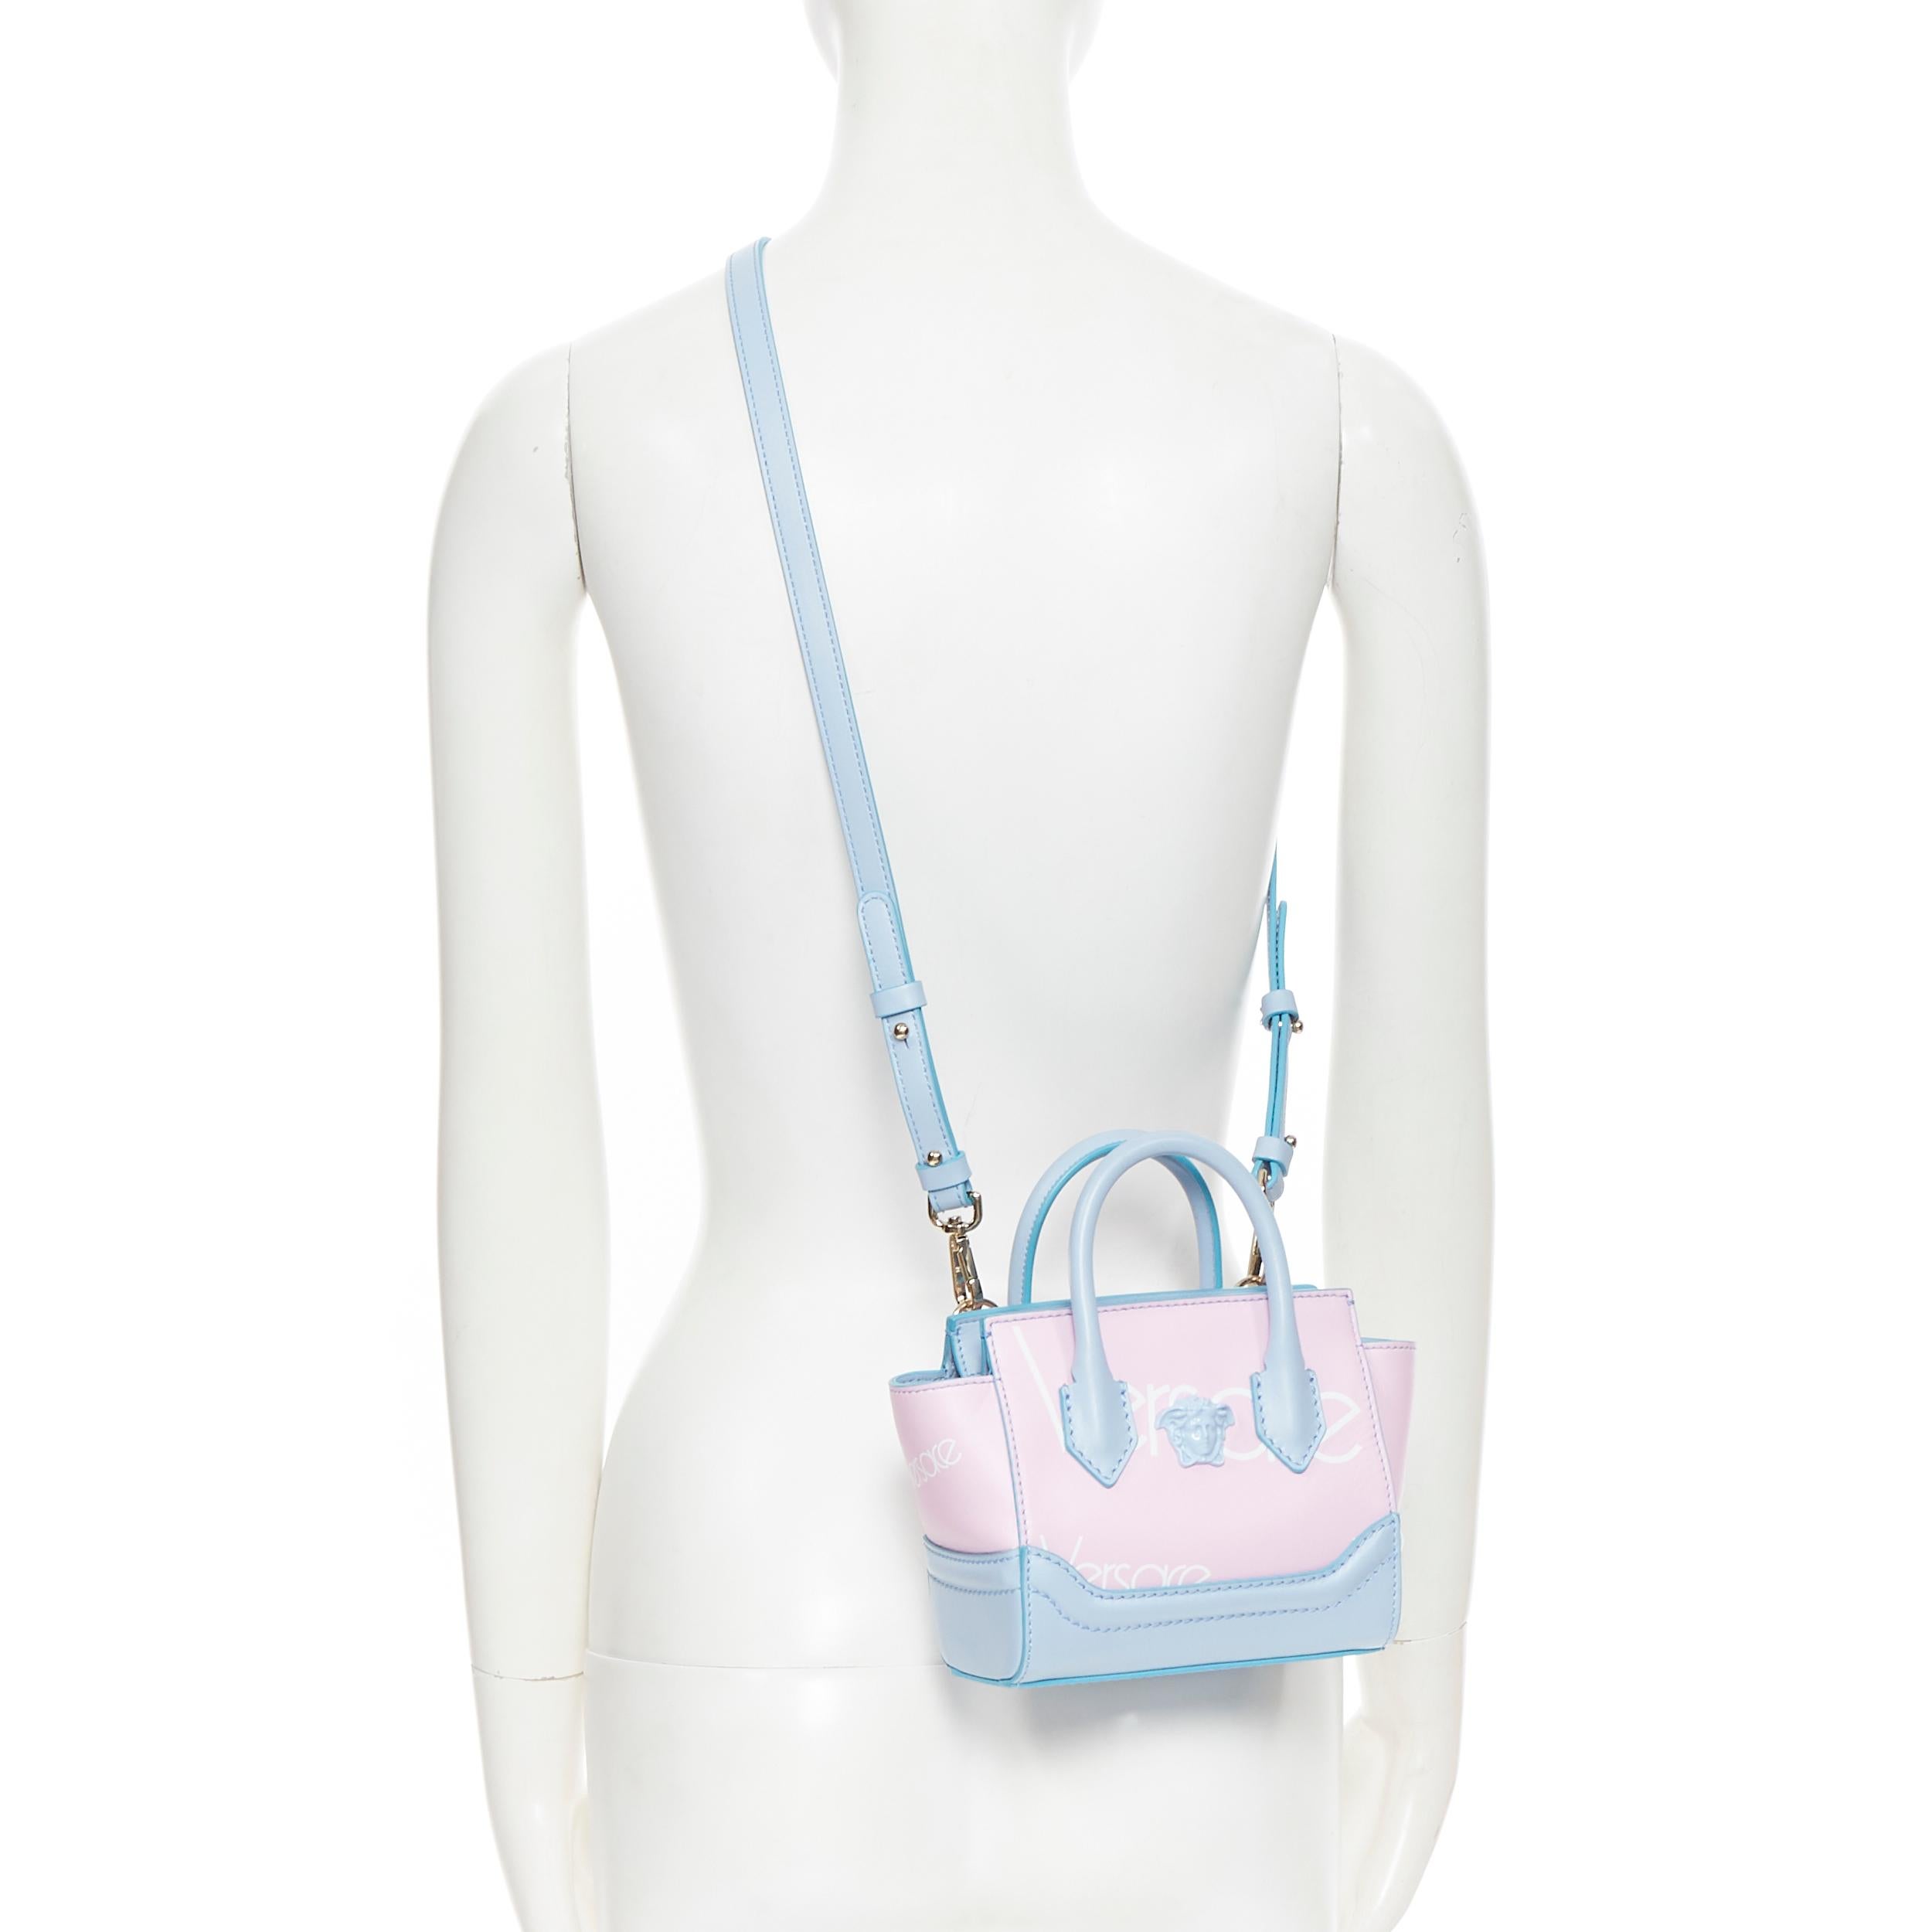 new YOUNG VERSACE Micro Palazzo Empire light pink blue logo print shoulder bag
Brand: Young Versace
Designer: Donatella Versace
Collection: 2019
Model Name / Style: Palazzo Empire
Material: Leather
Color: Pink
Pattern: Logo
Closure: Zip
Lining